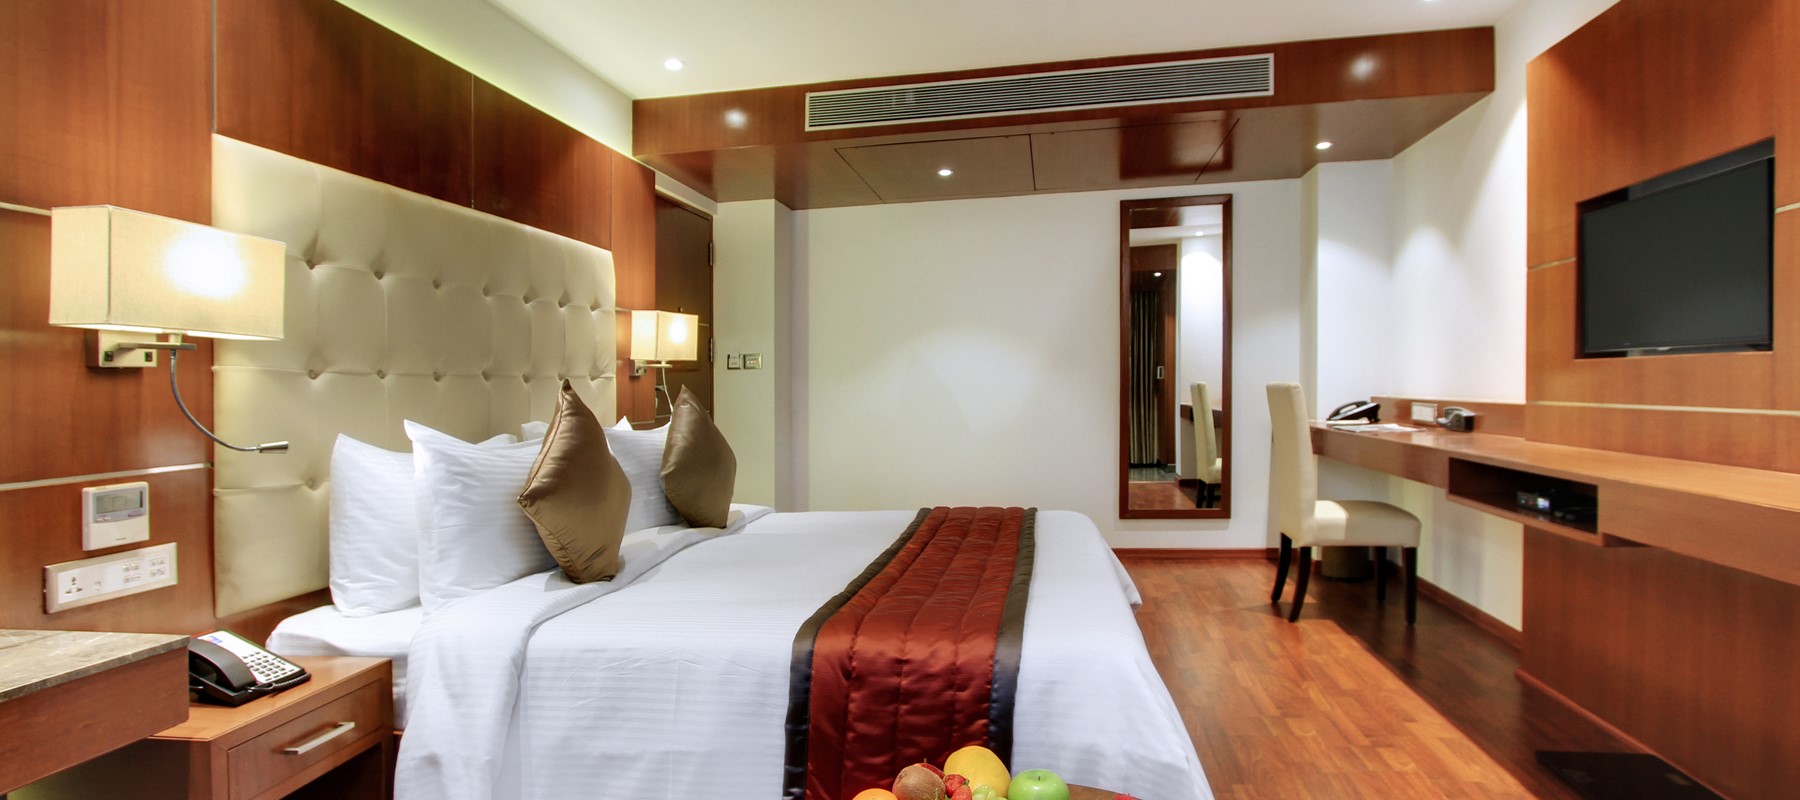 Top Hotels from 8000Rs. in HSR Layout - Book Luxury Hotels Online - Justdial